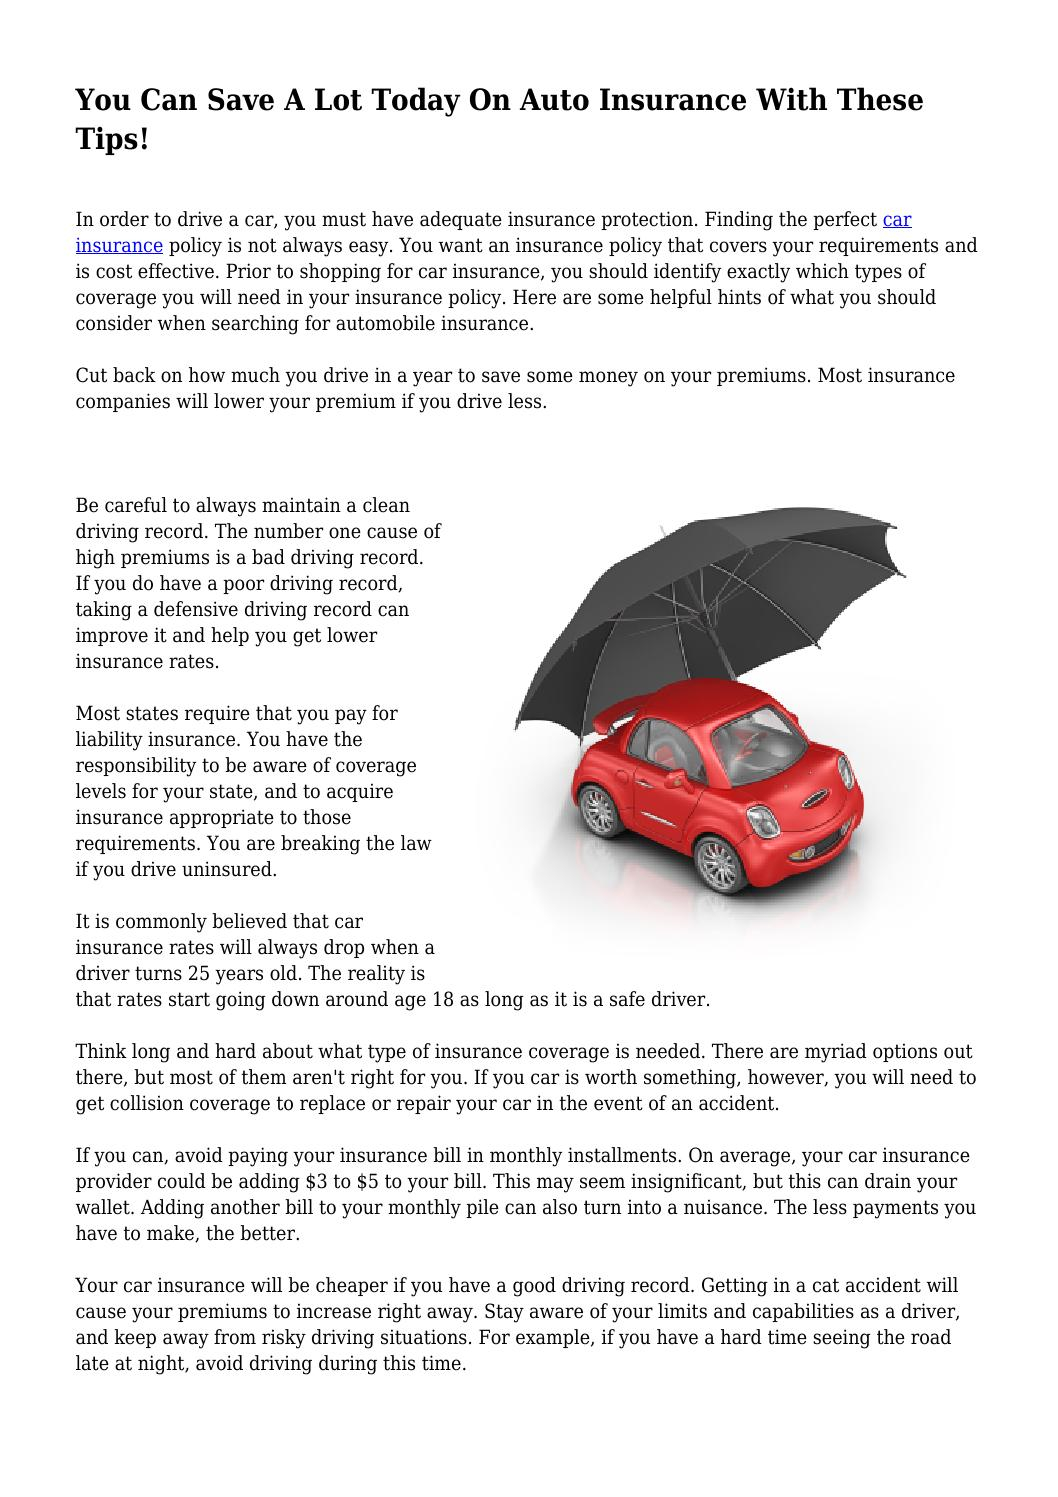 You Can Save A Lot Today On Auto Insurance With These Tips in dimensions 1058 X 1497